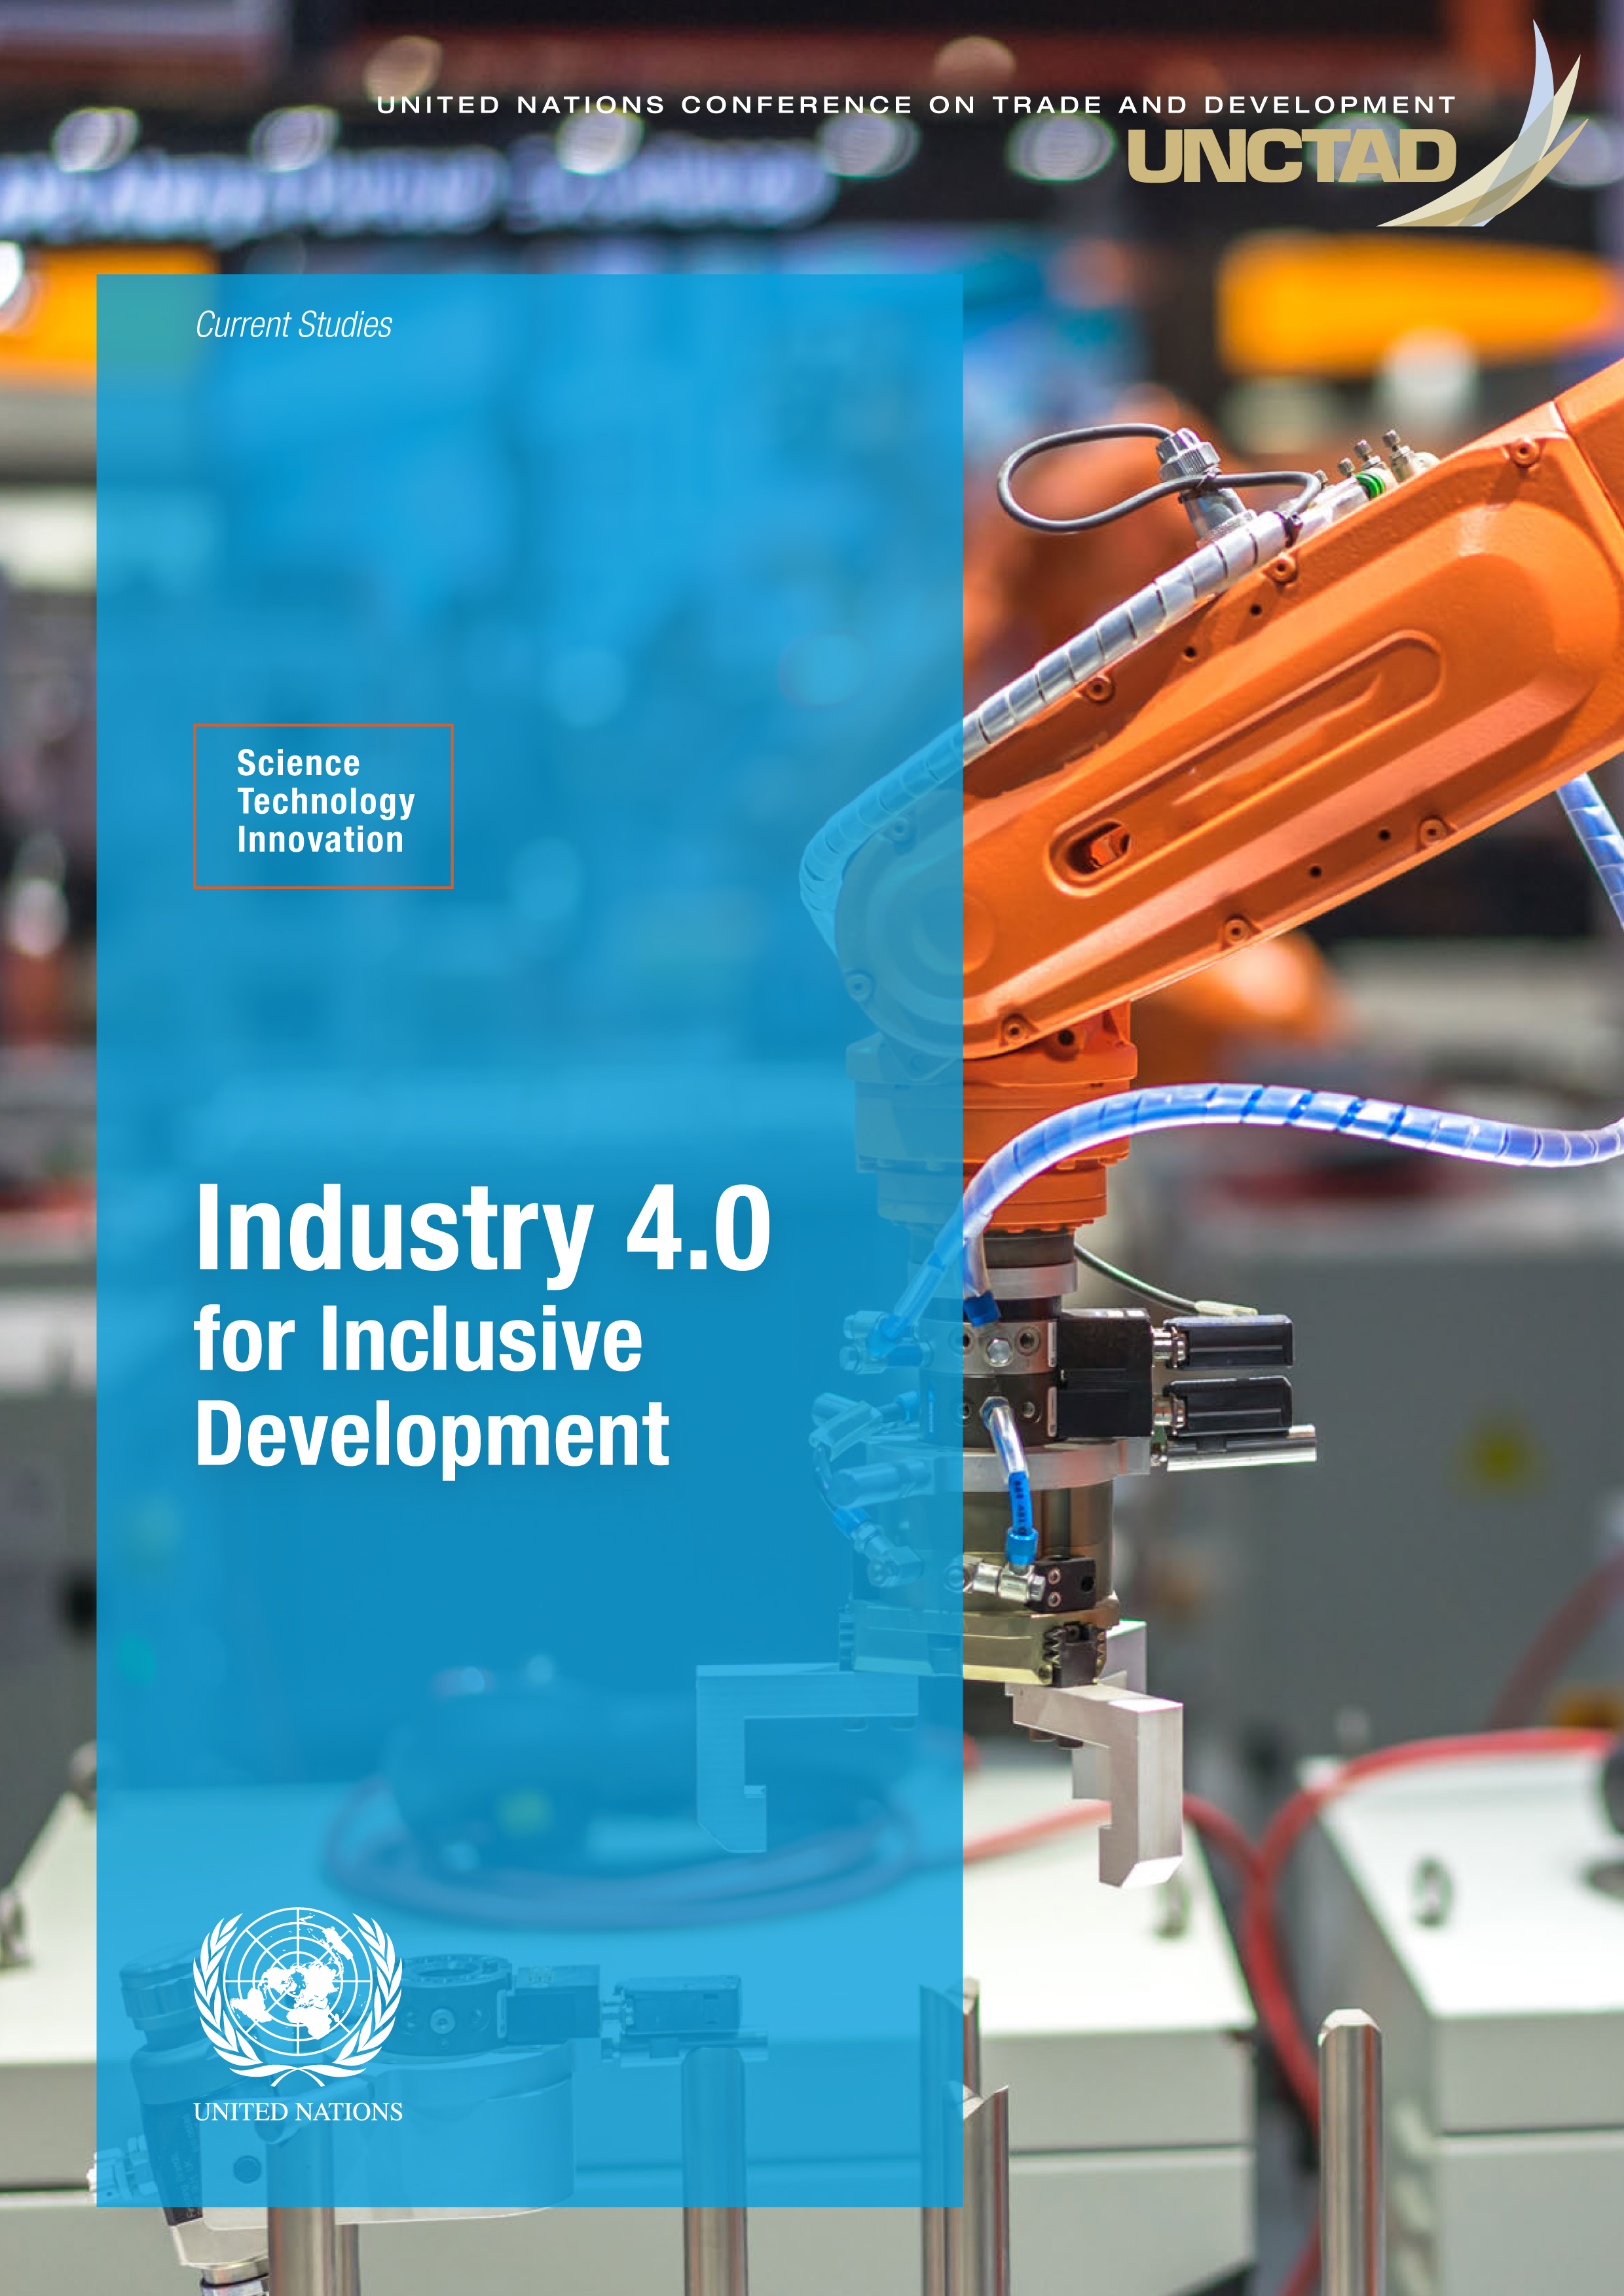 image of Harnessing industry 4.0 for inclusive and sustainable development